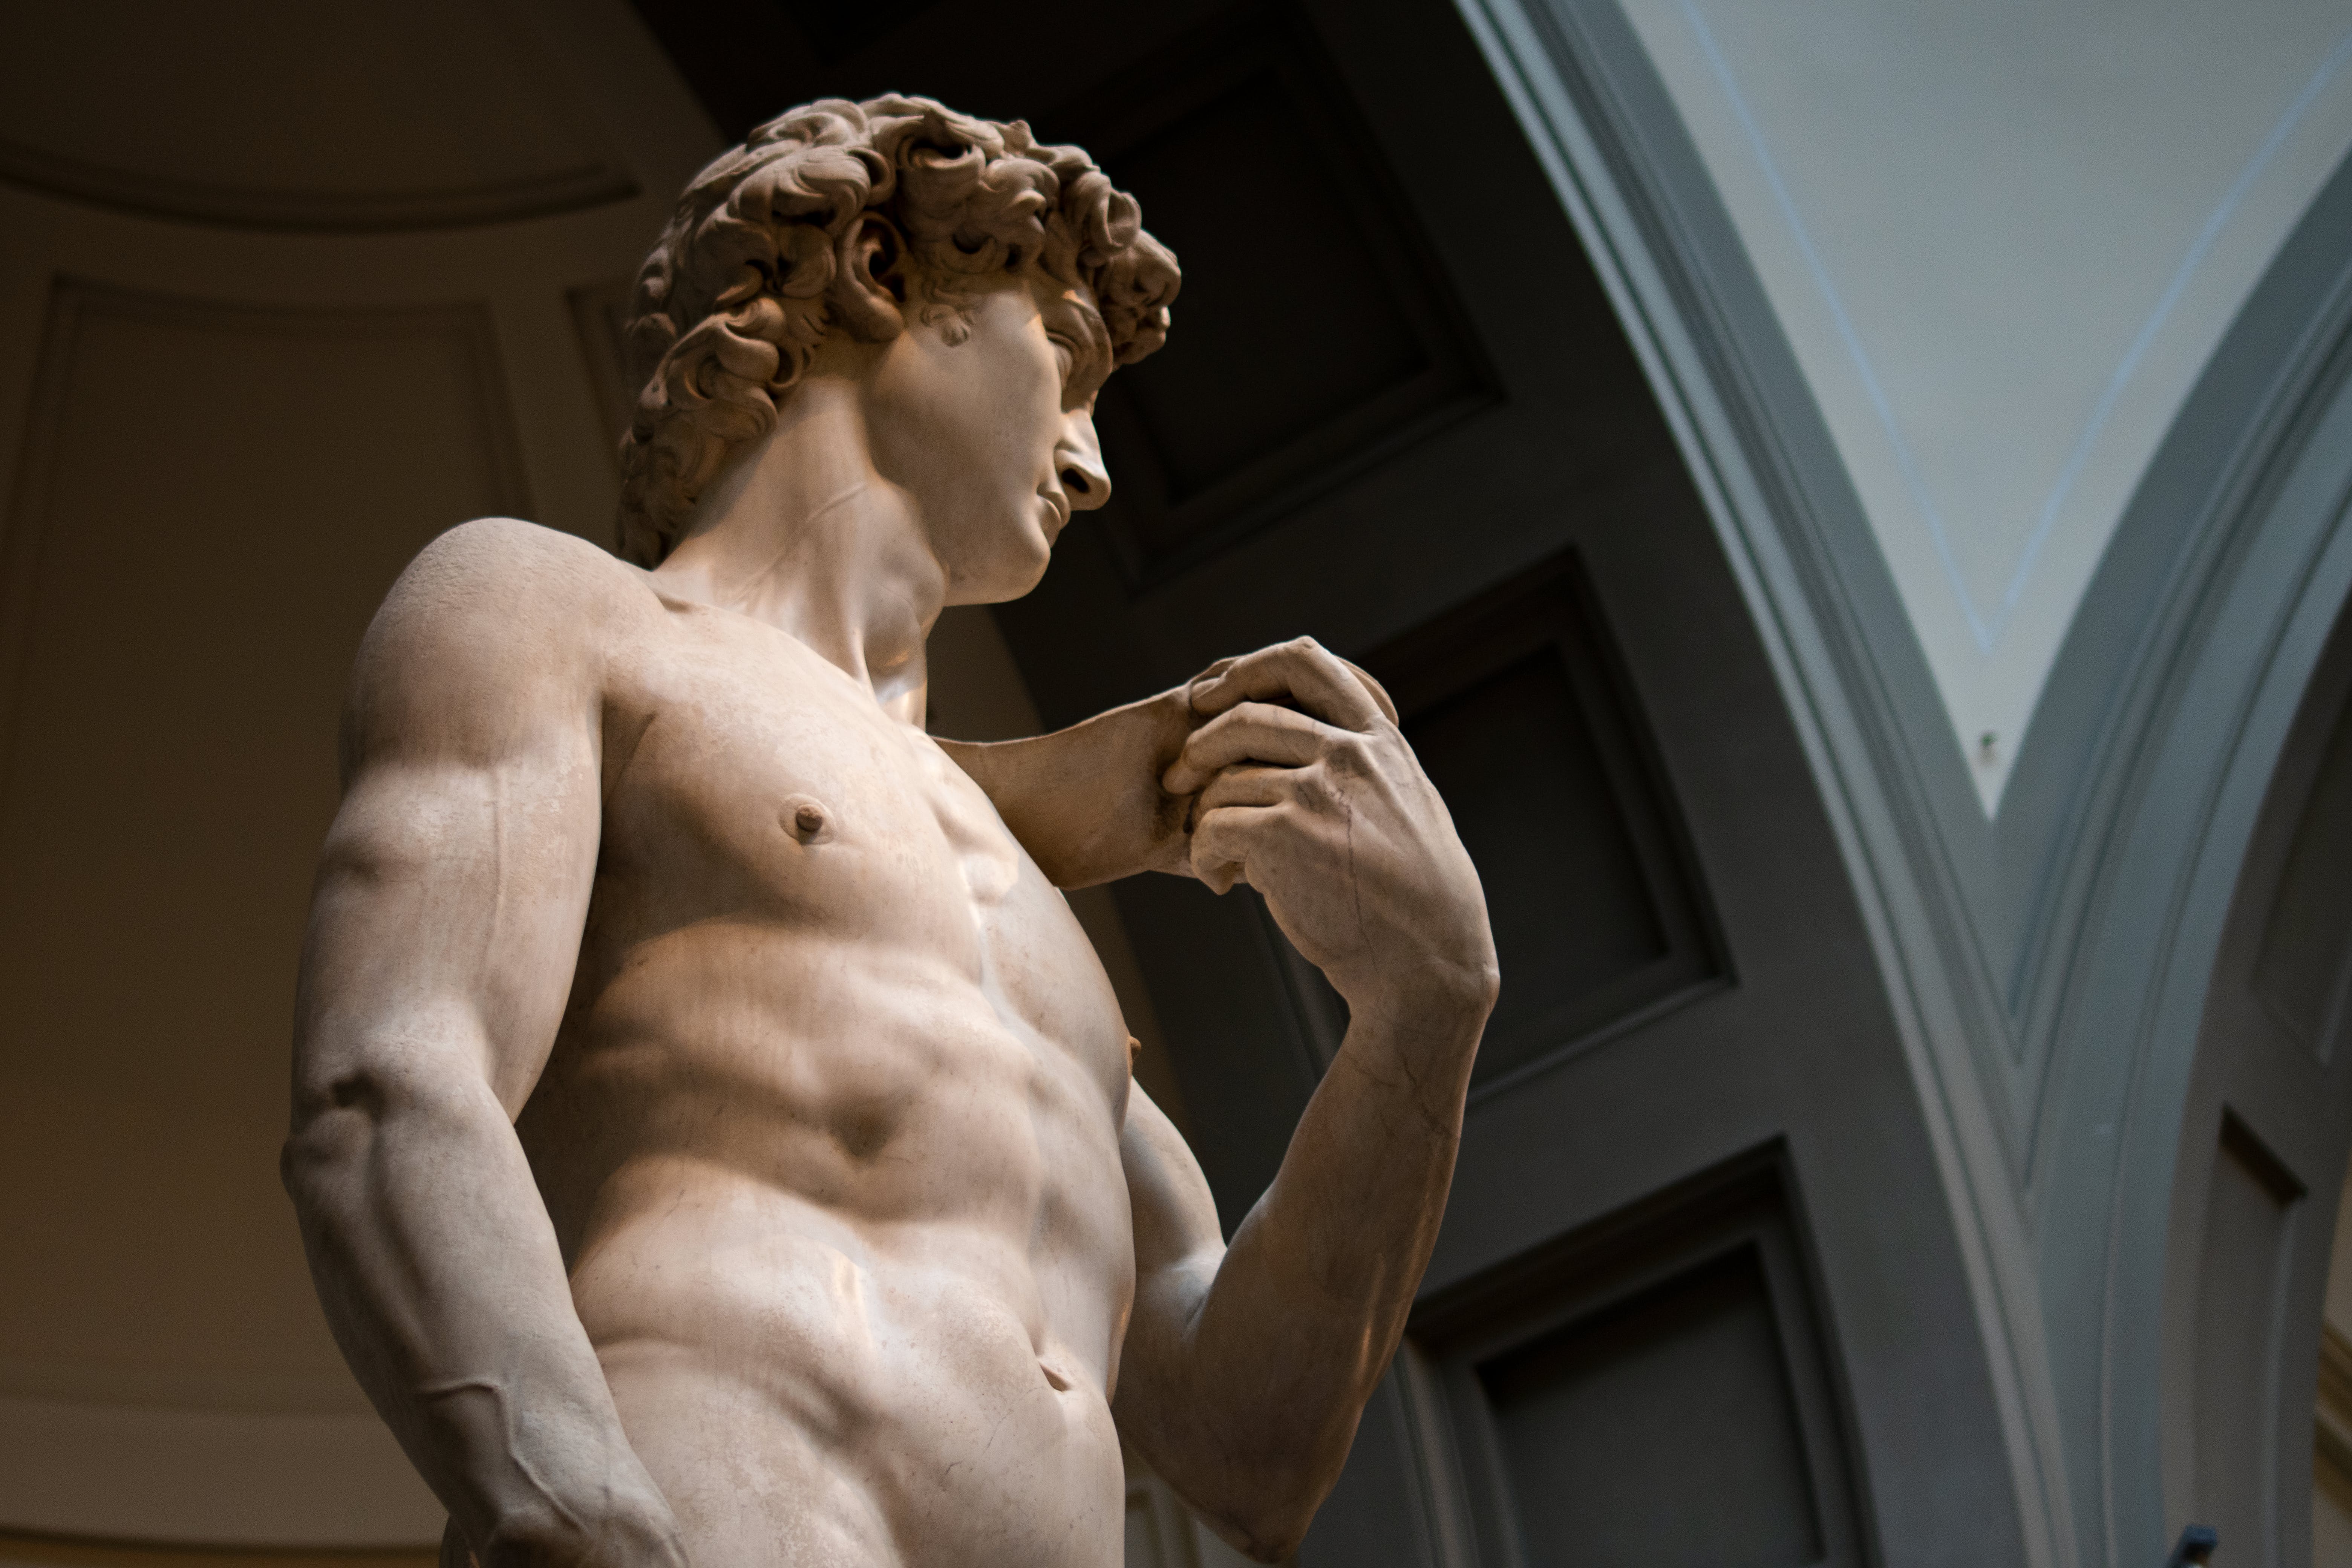 The "David" sculpture in Florence, Italy